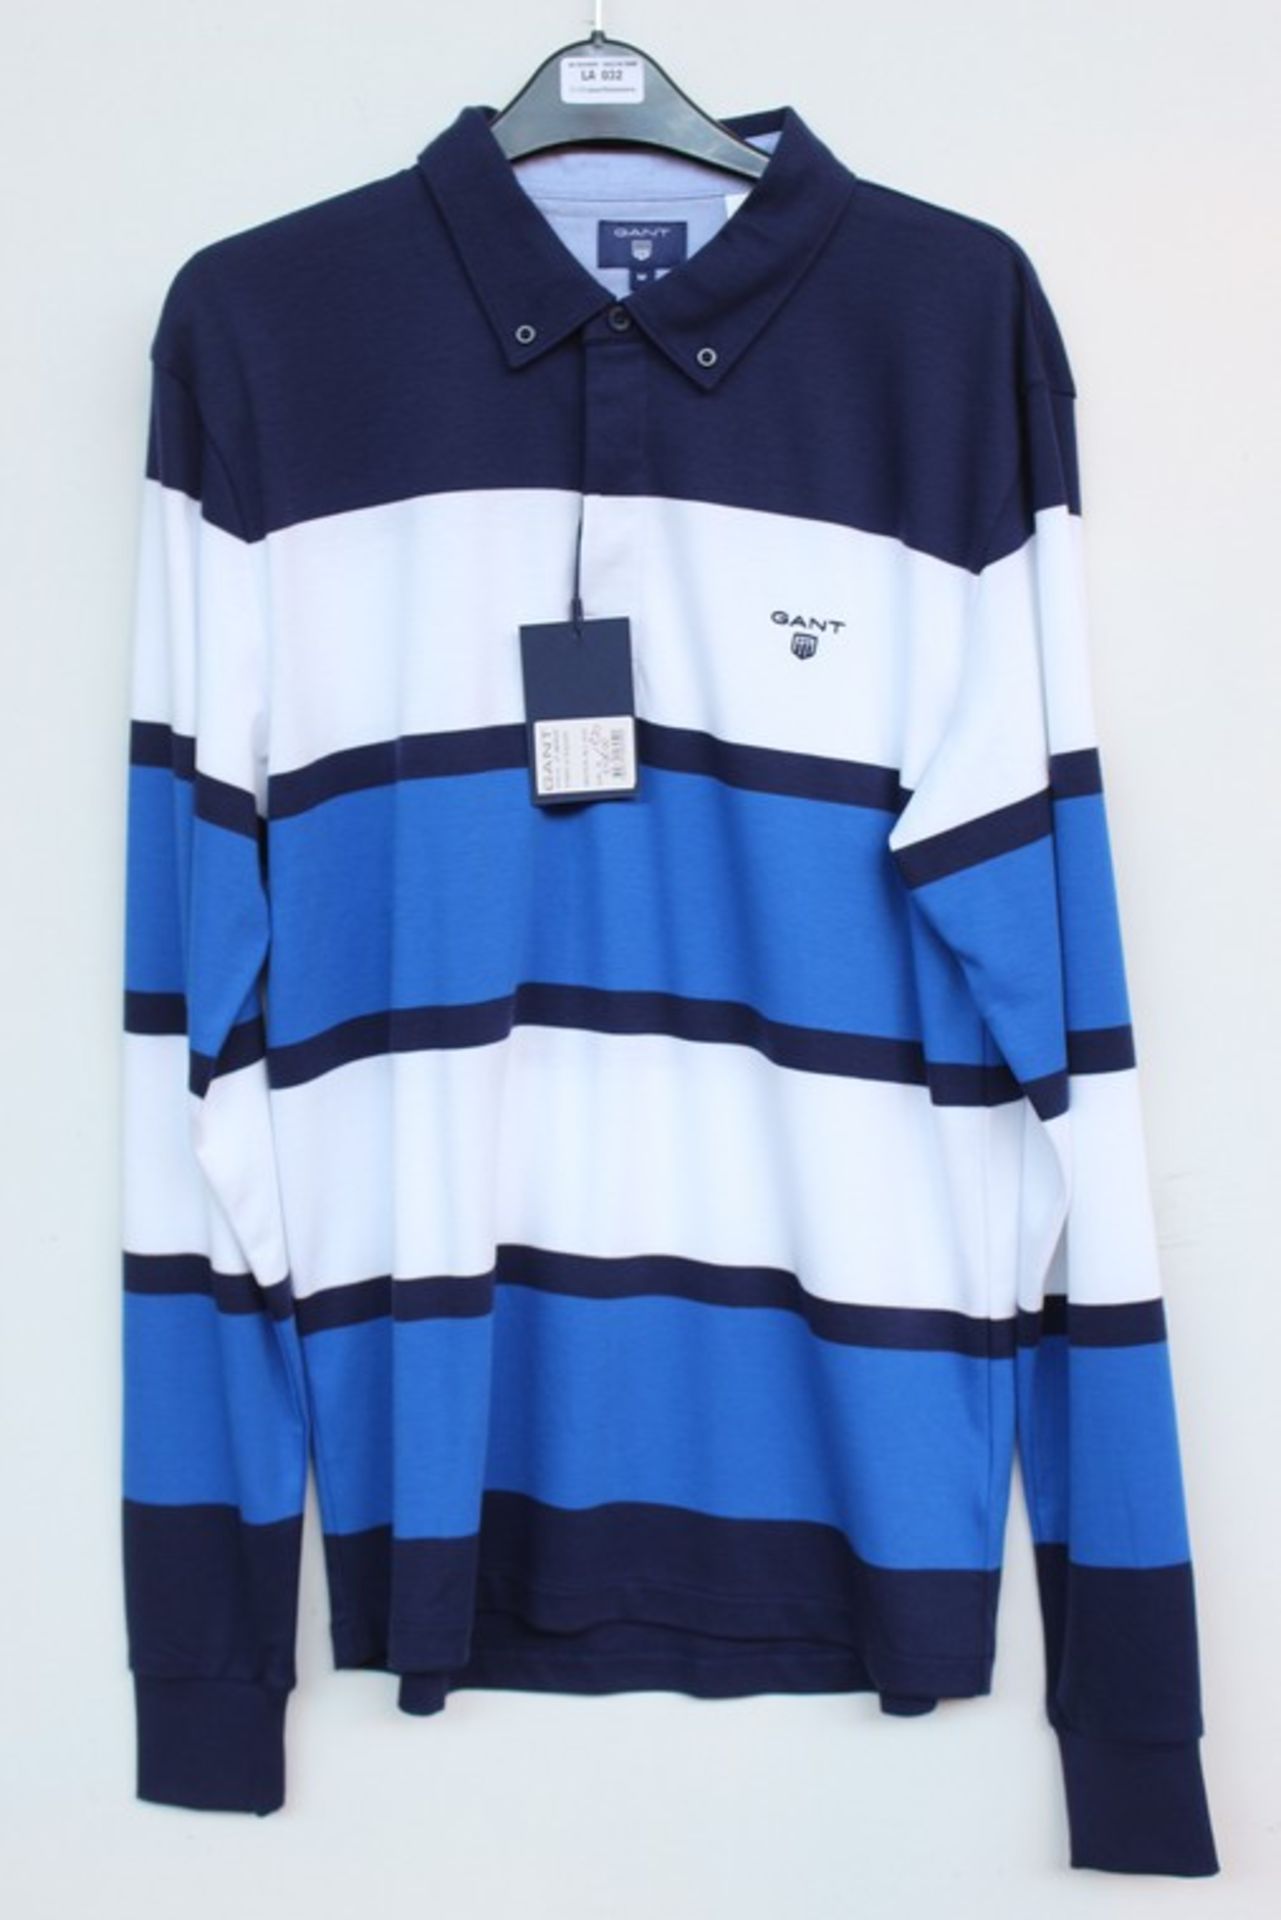 1 x GANT STRIPED LONG SLEEVE SHIRT RRP £100 (16.10.17) *PLEASE NOTE THAT THE BID PRICE IS MULTIPLIED